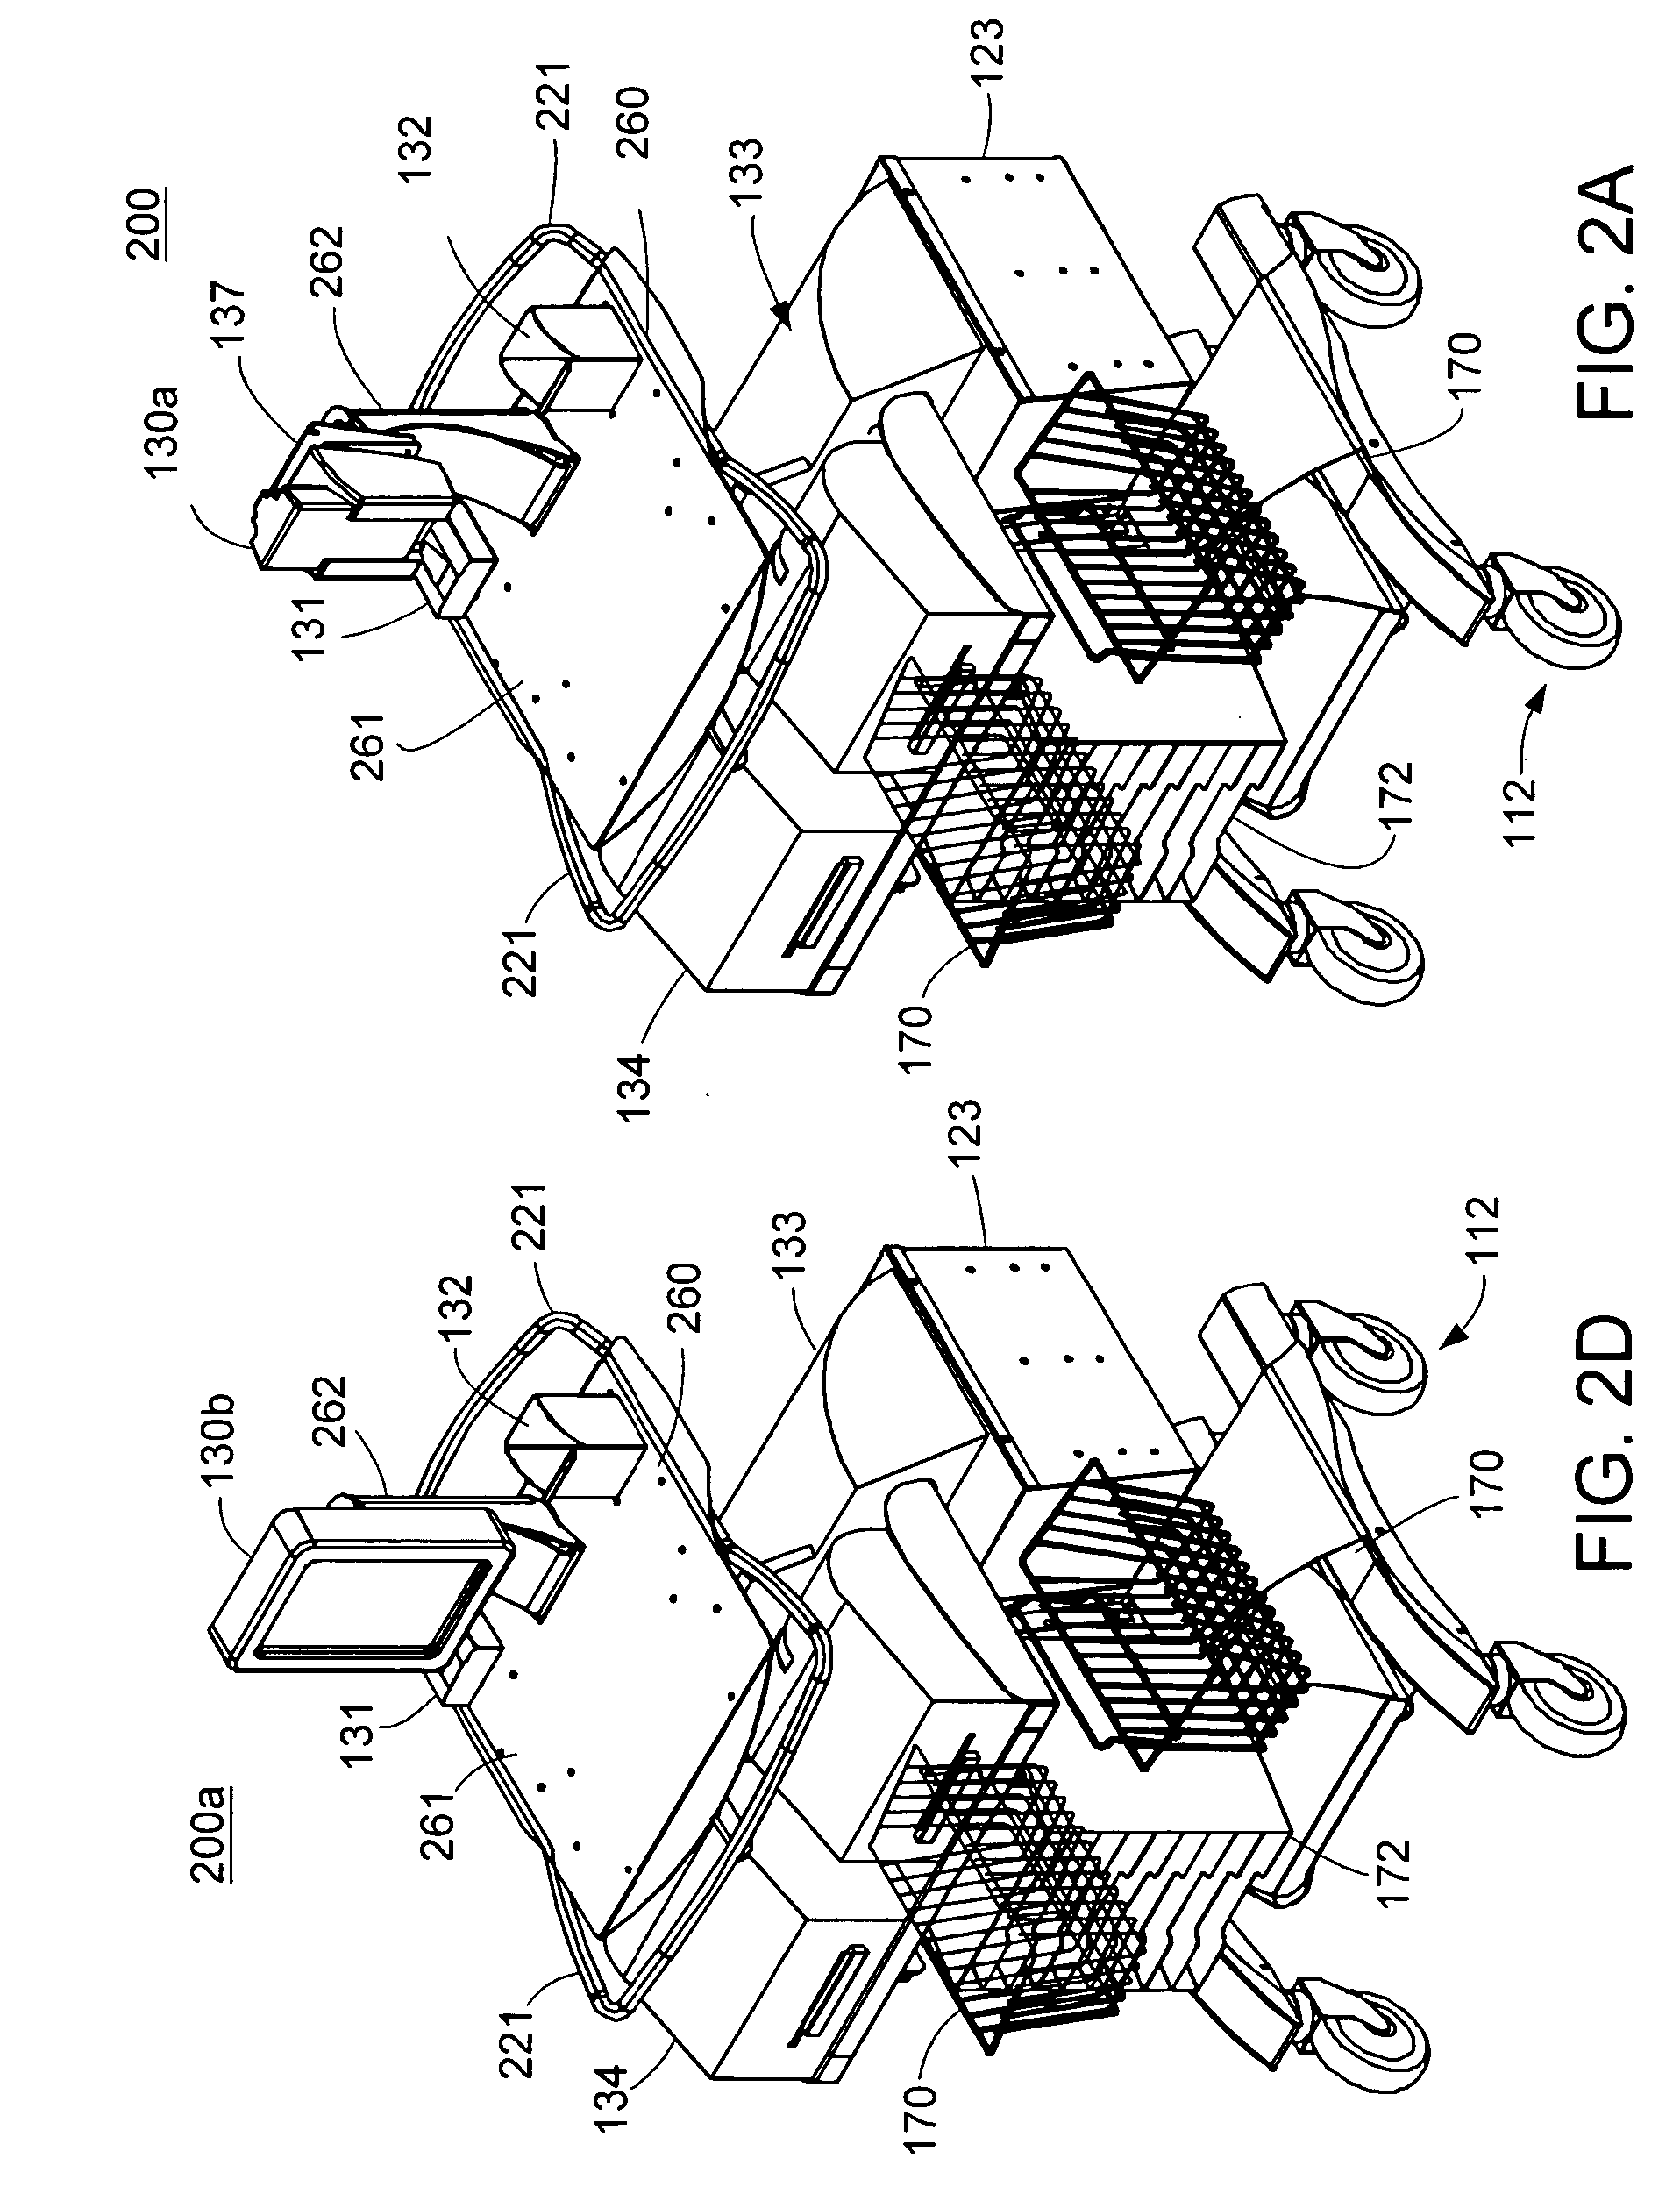 Mobile wireless computer system including devices and methods related thereto